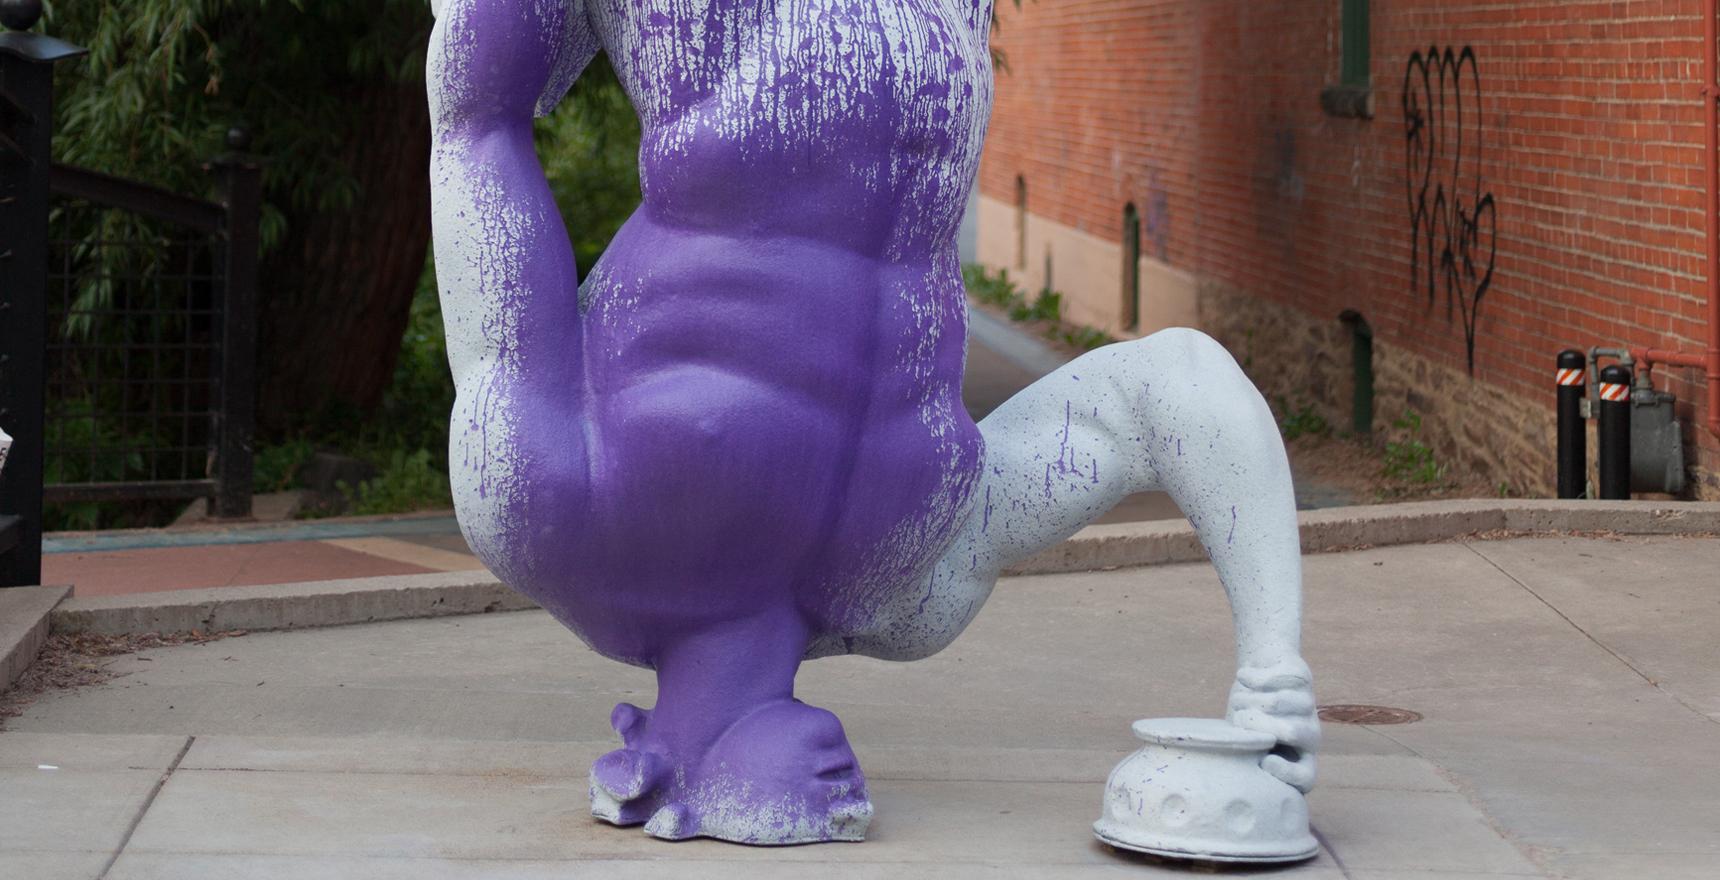 an inverted statue of a man with abbreviated head painted purple outside